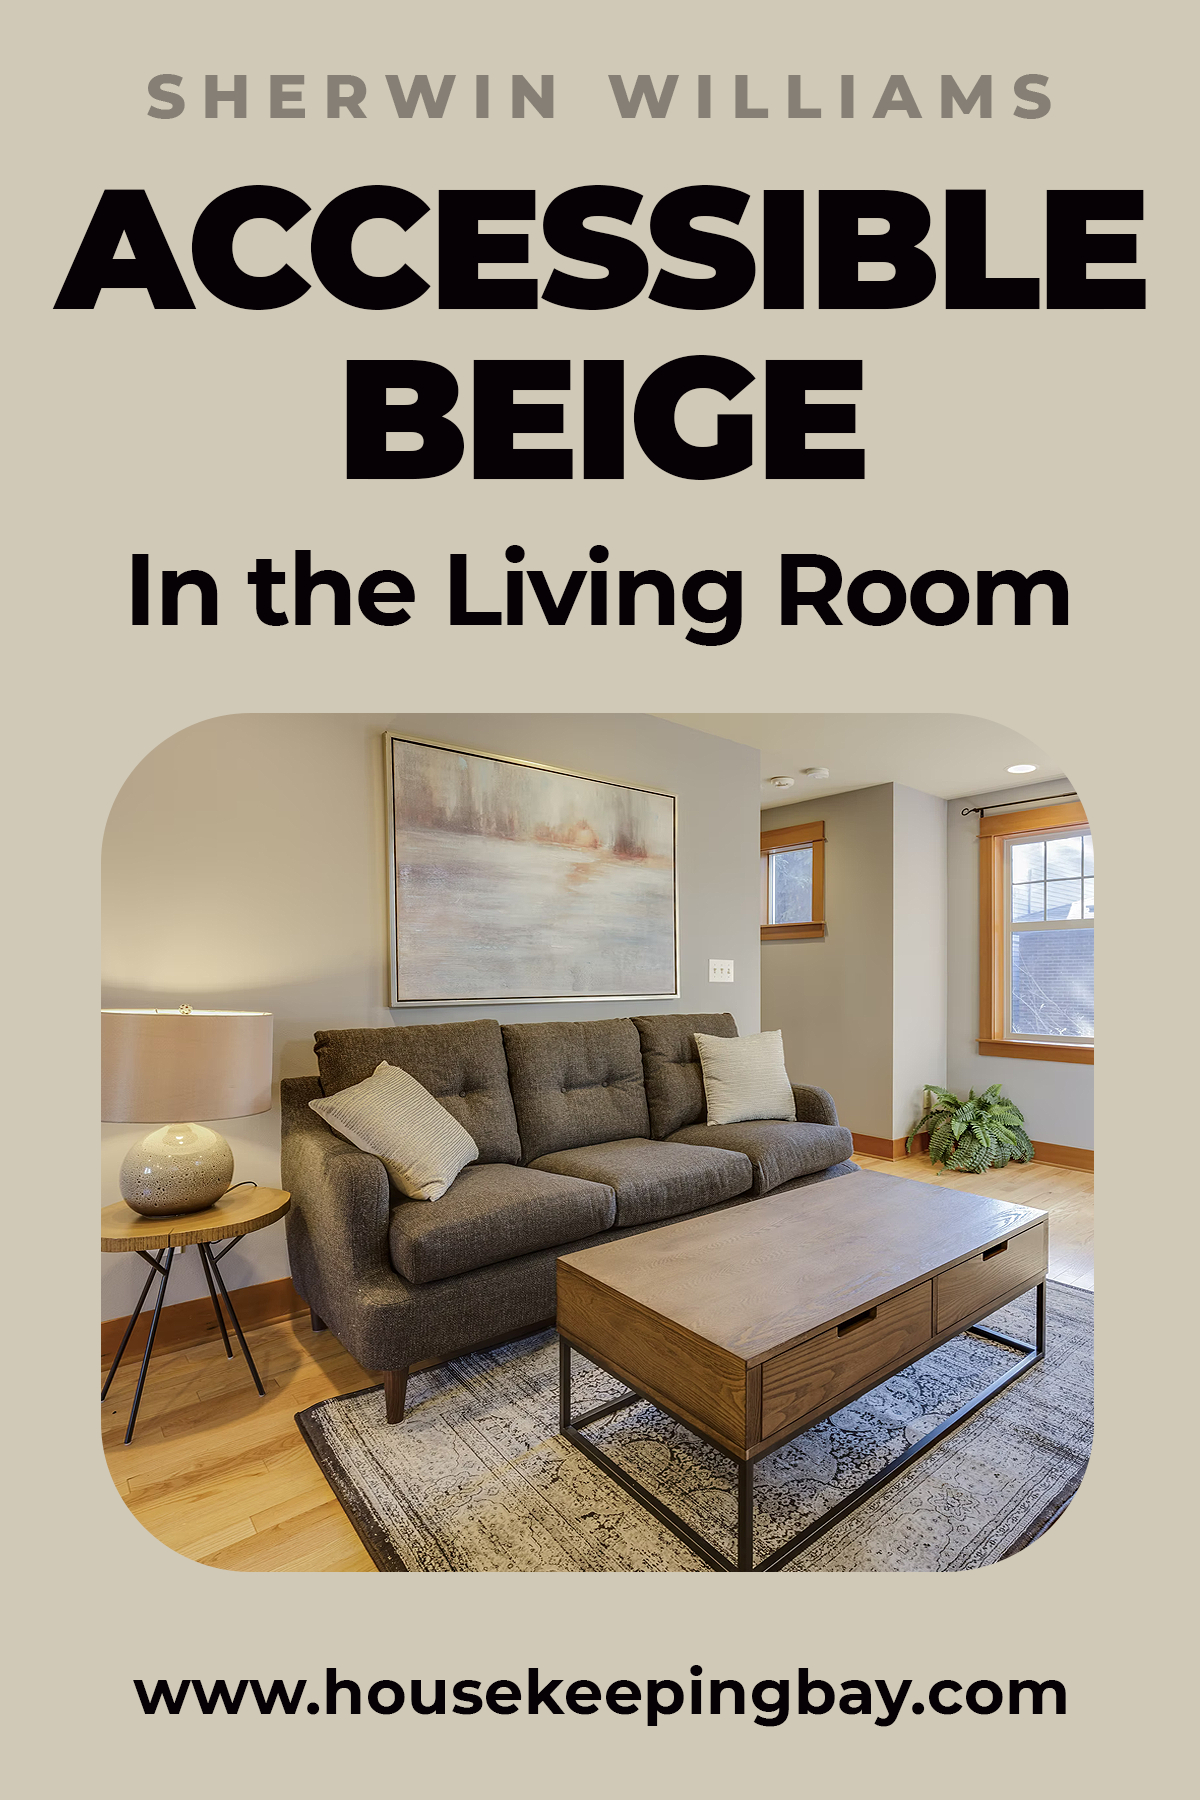 Accessible Beige In the Living Room